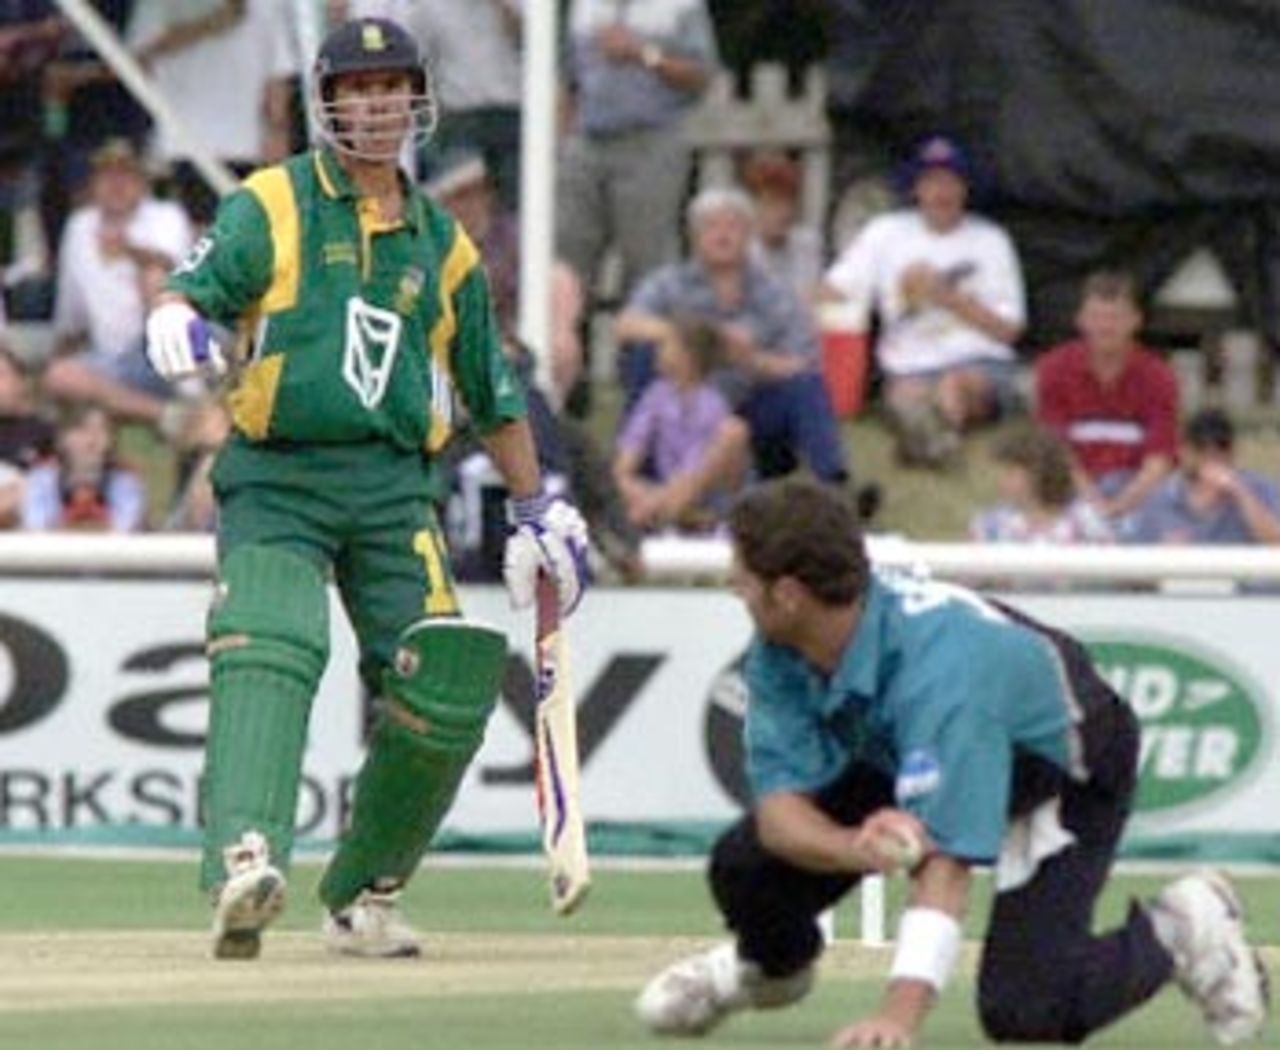 Cairns effects good stop off his own bowling. New Zealand in South Africa 2000/01, 1st ODI, South Africa v New Zealand North West Cricket Stadium, Potchefstroom, 20 October 2000